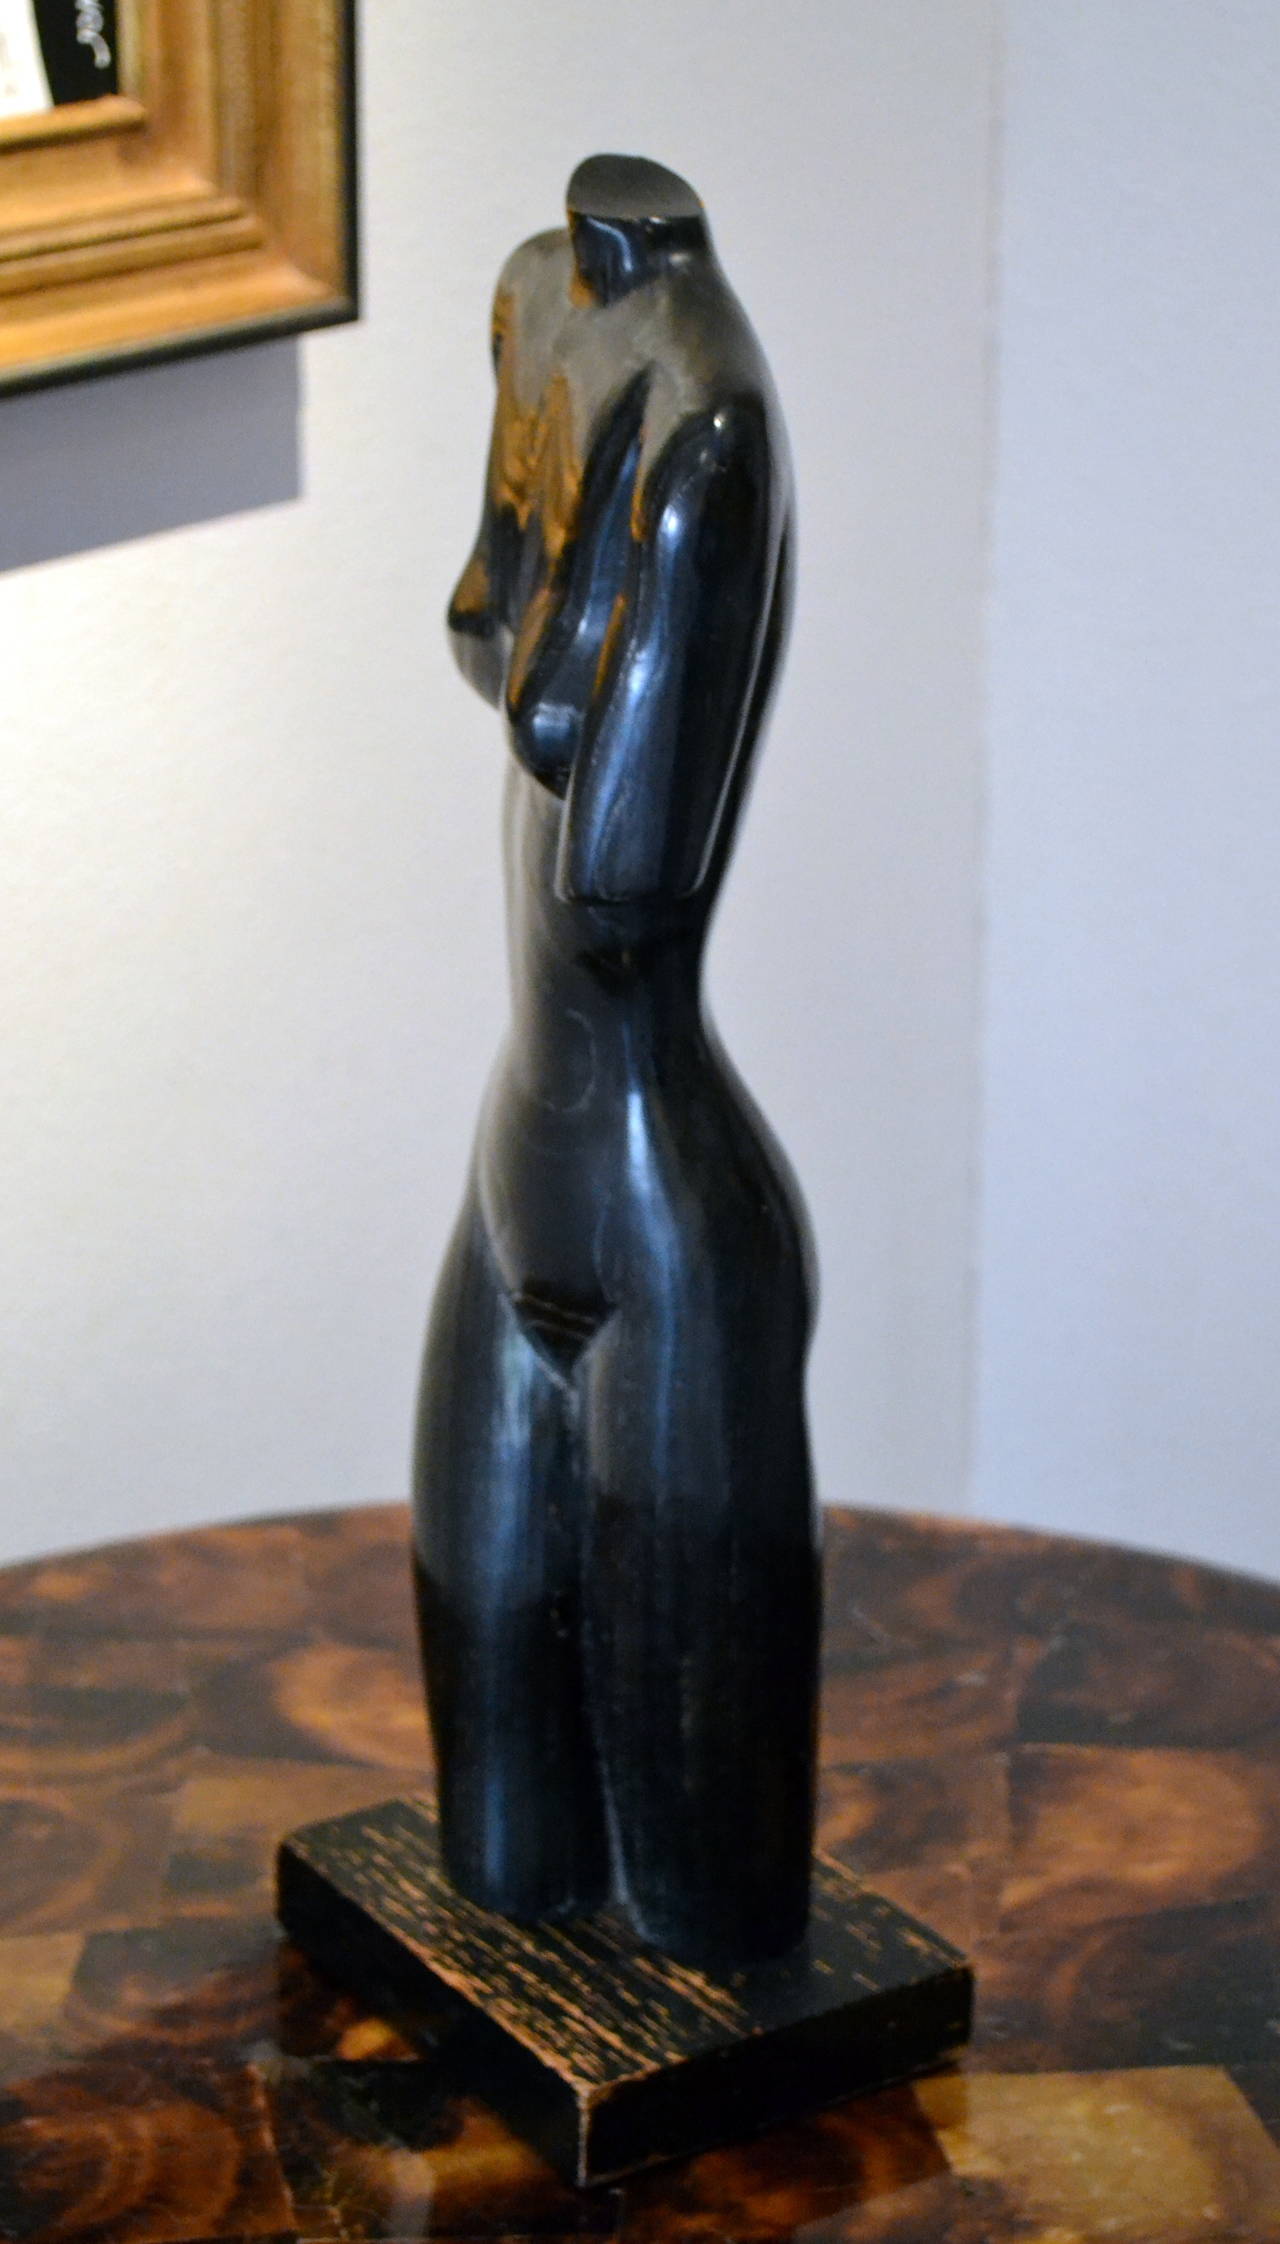 Artist Edward Armen Stasack (b. 1929) created this elegant Modernist 
nude sculpture from black limed Oak wood.  The figure is elegantly carved and grain of the wood adds tremendous character to the art work.  Overall the sculpture reads sleek,